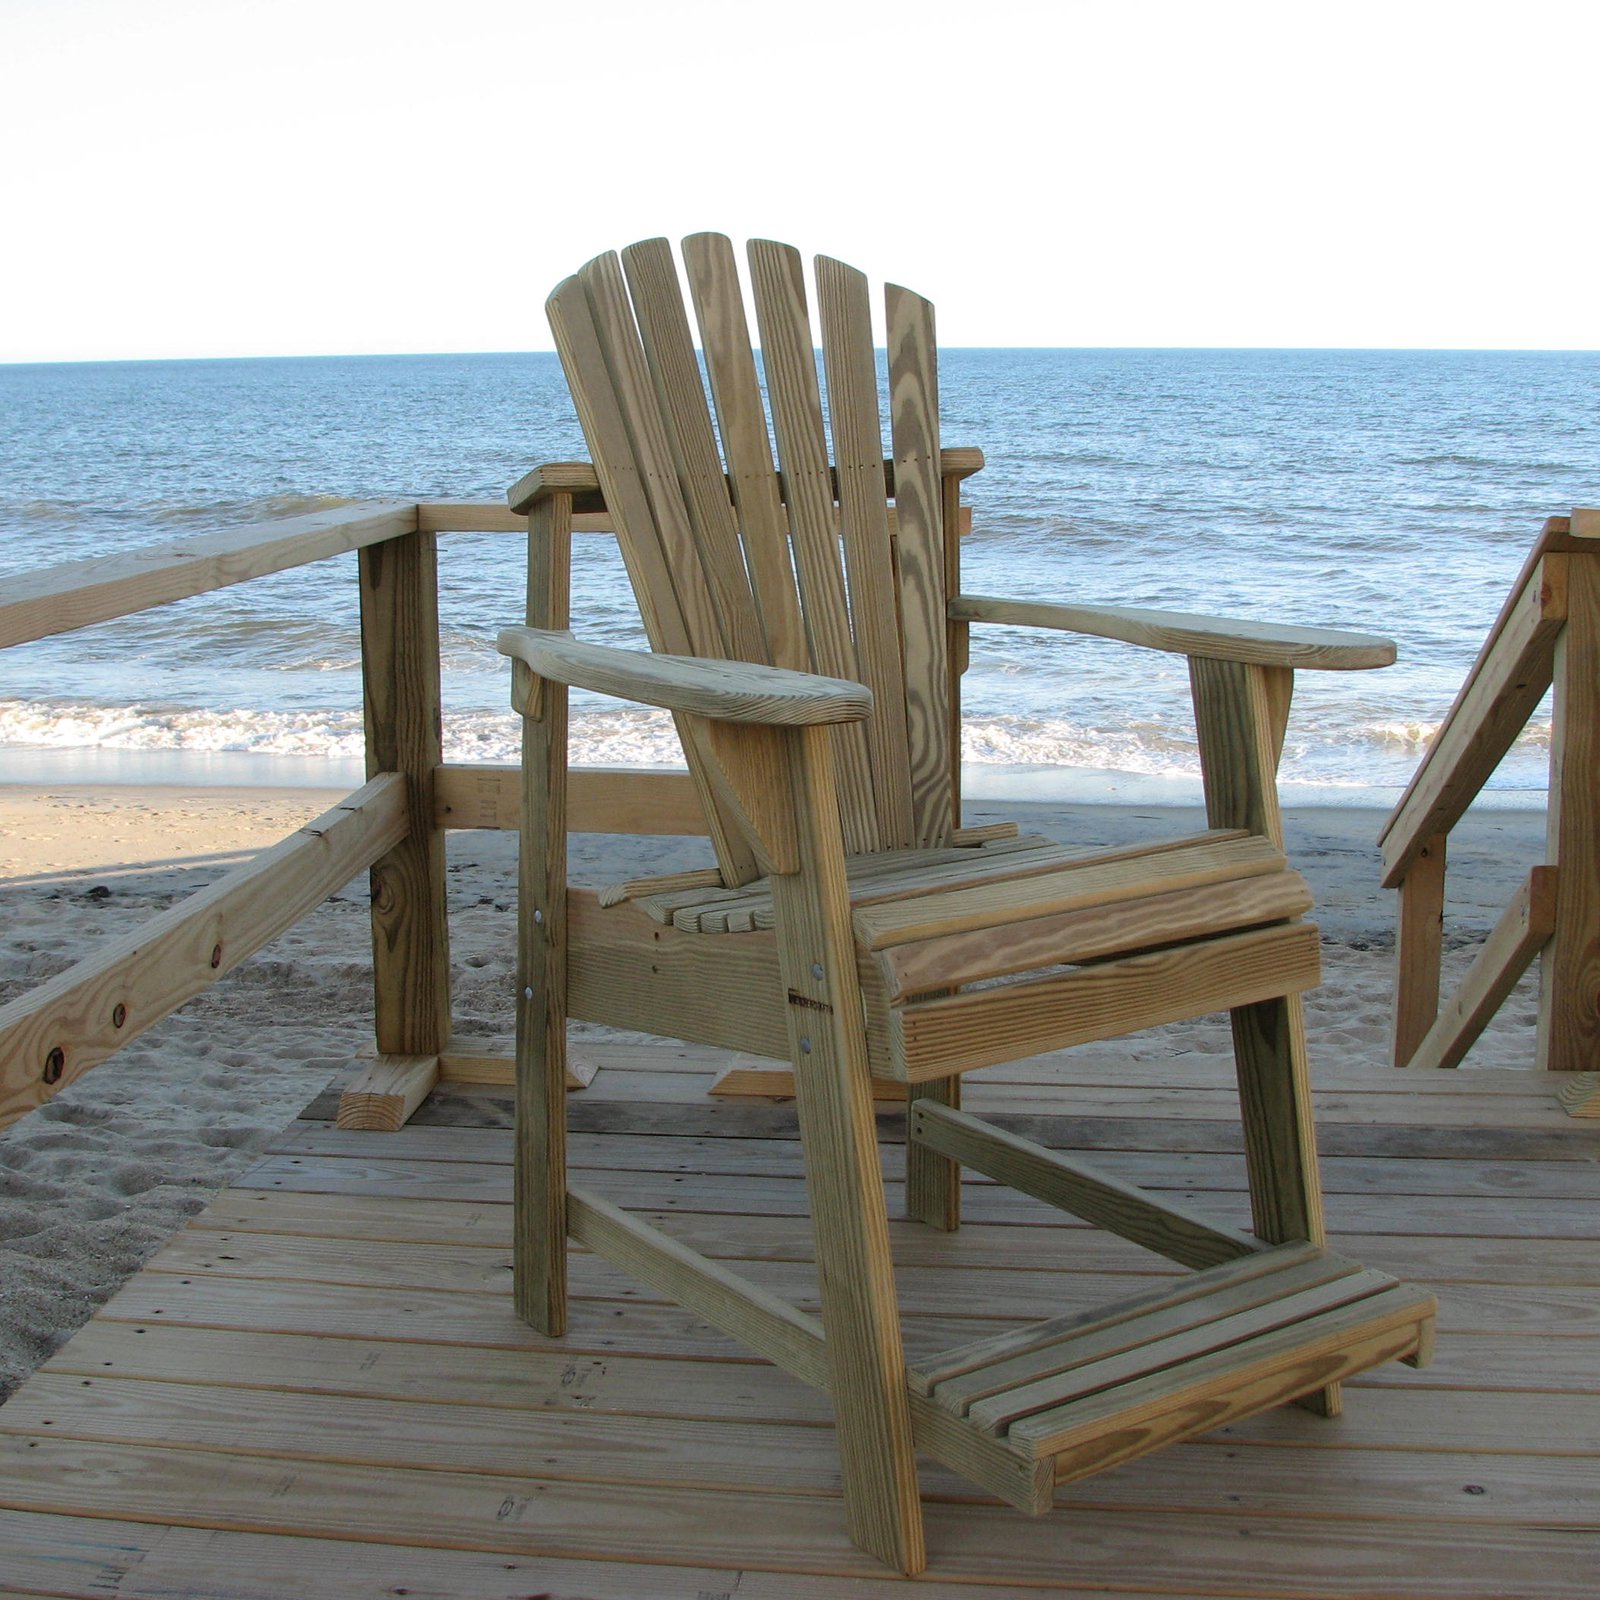 Weathercraft Designers Choice Treated Balcony Adirondack Chair with Footrest - Natural - image 5 of 8